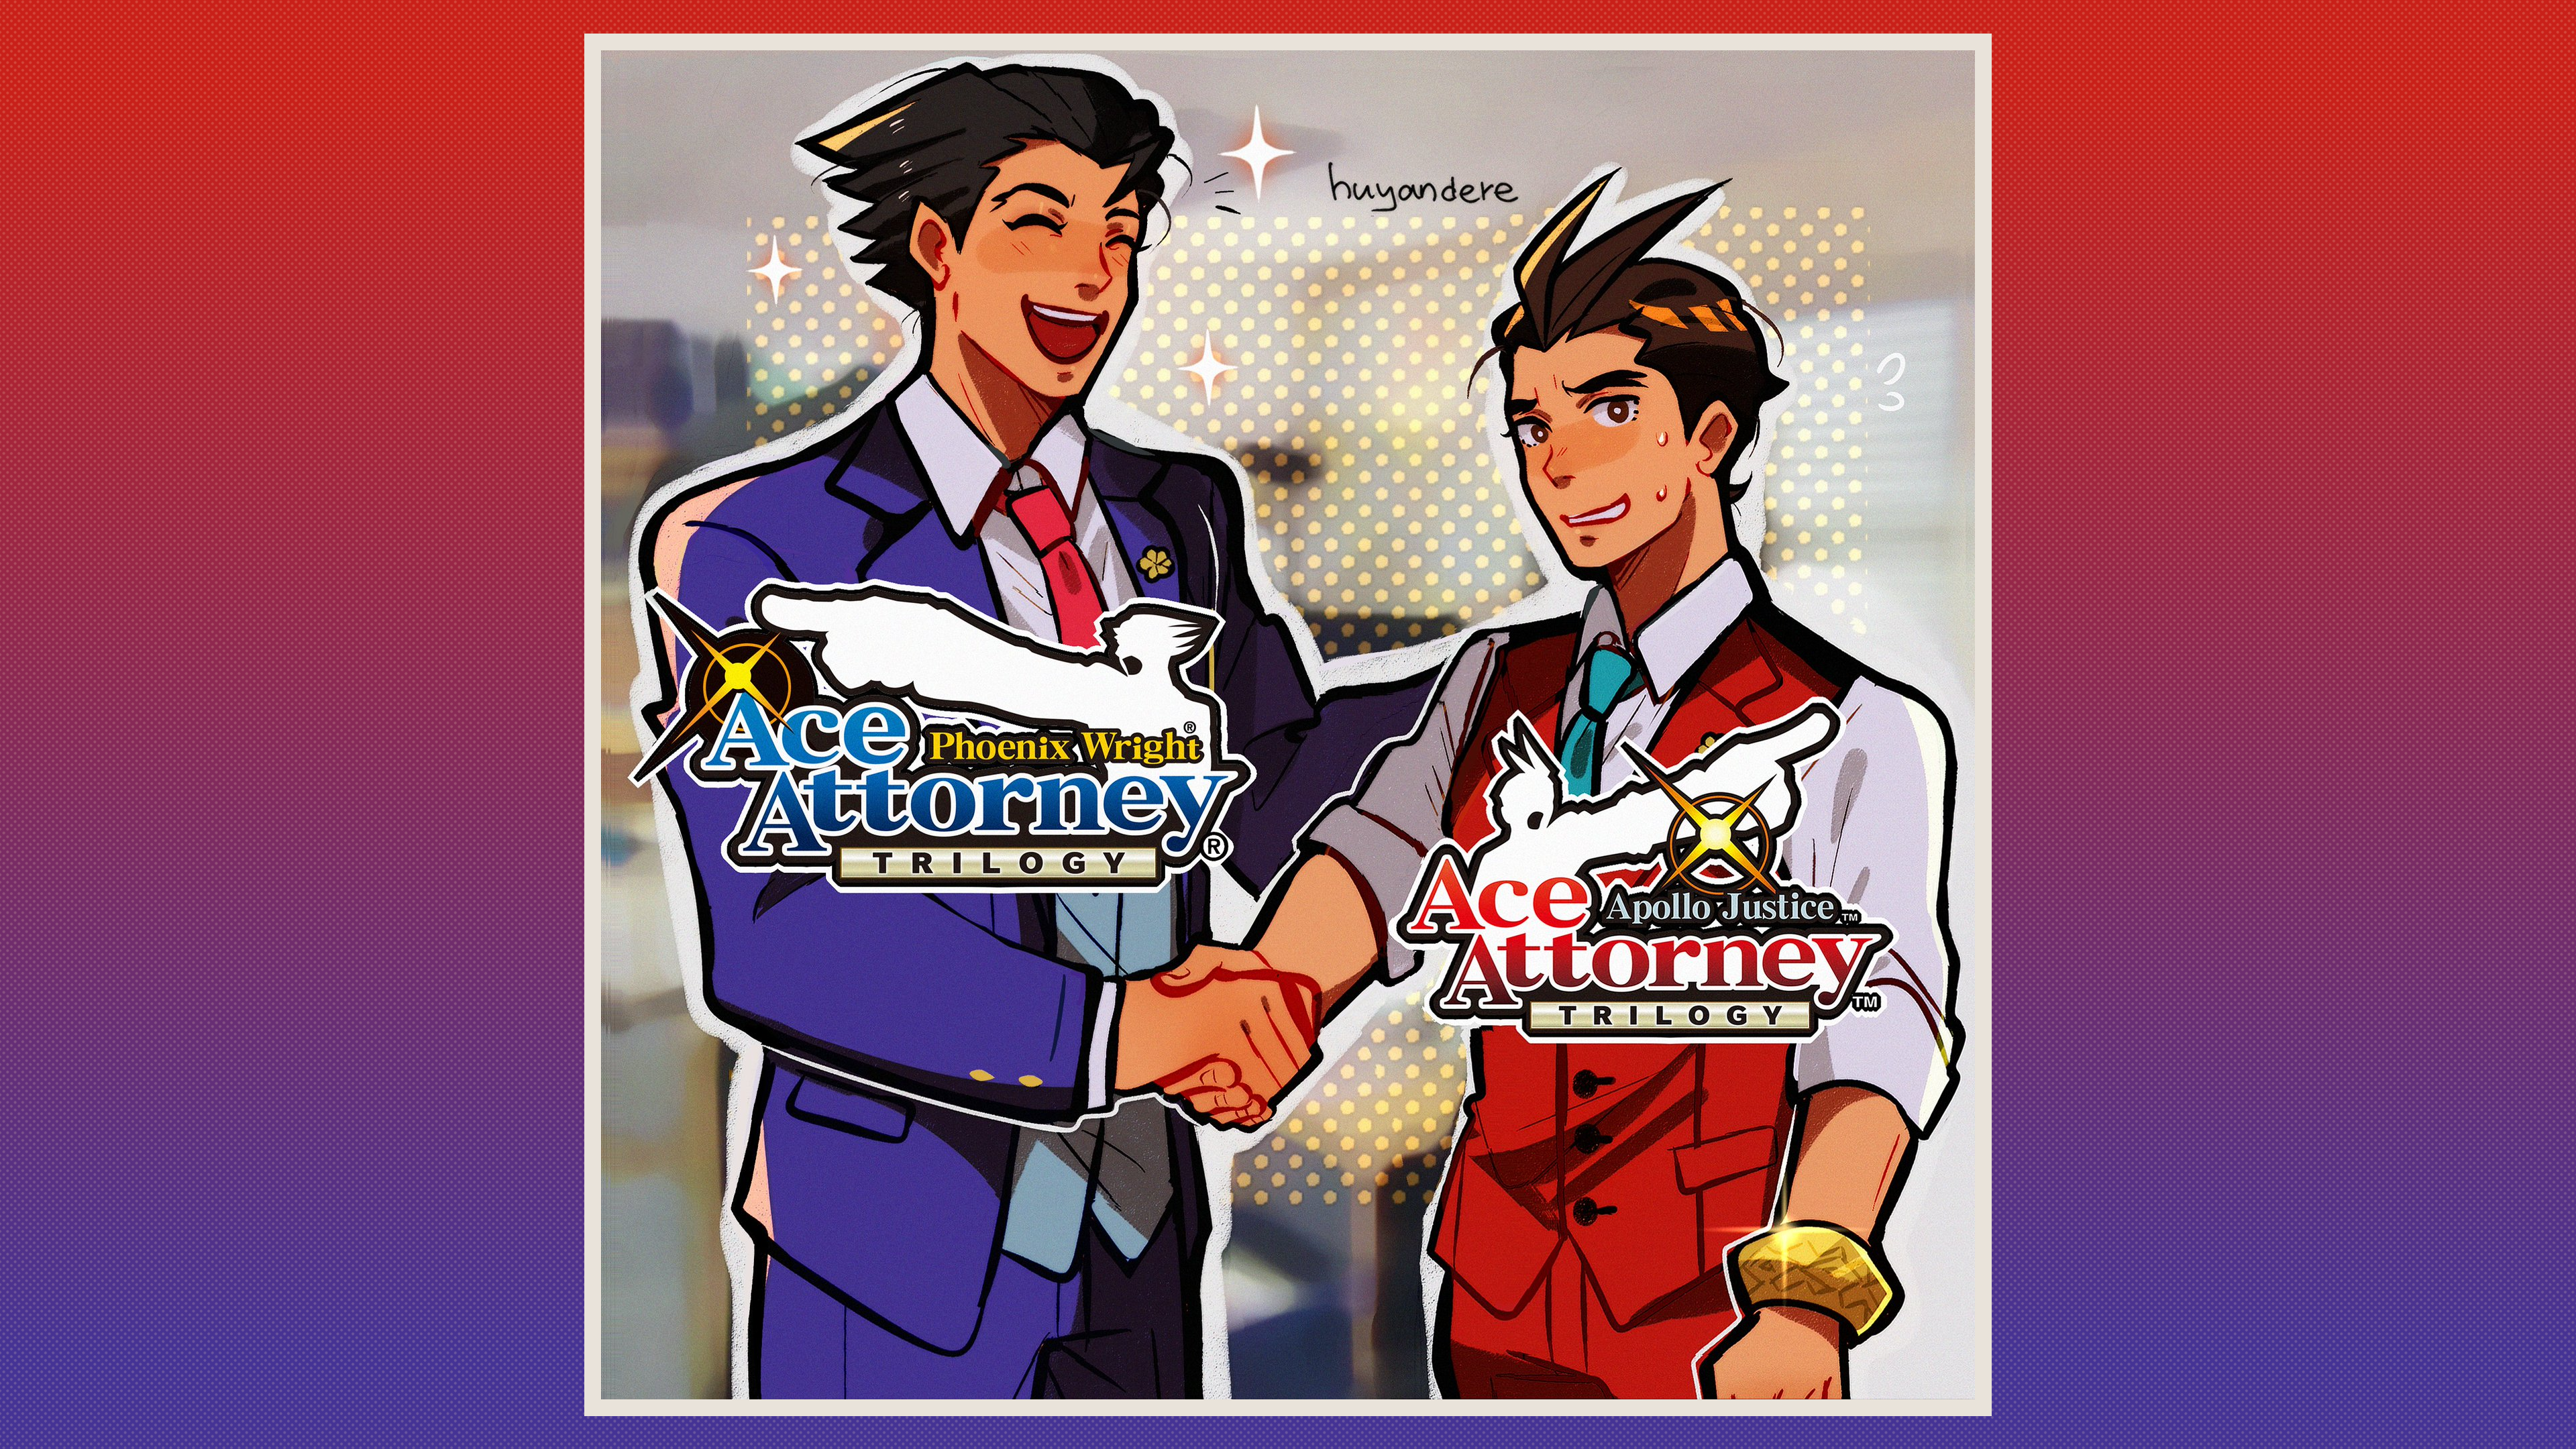 Wallpaper : video games, Spiky Hair, ace attorney, phoenix wright, Apollo  Justice, Trilogy, Capcom, suits, red tie, blue tie, vest, white shirt,  memes, The Office, Lapel Pin, embarrassed, smiling, open mouth, red